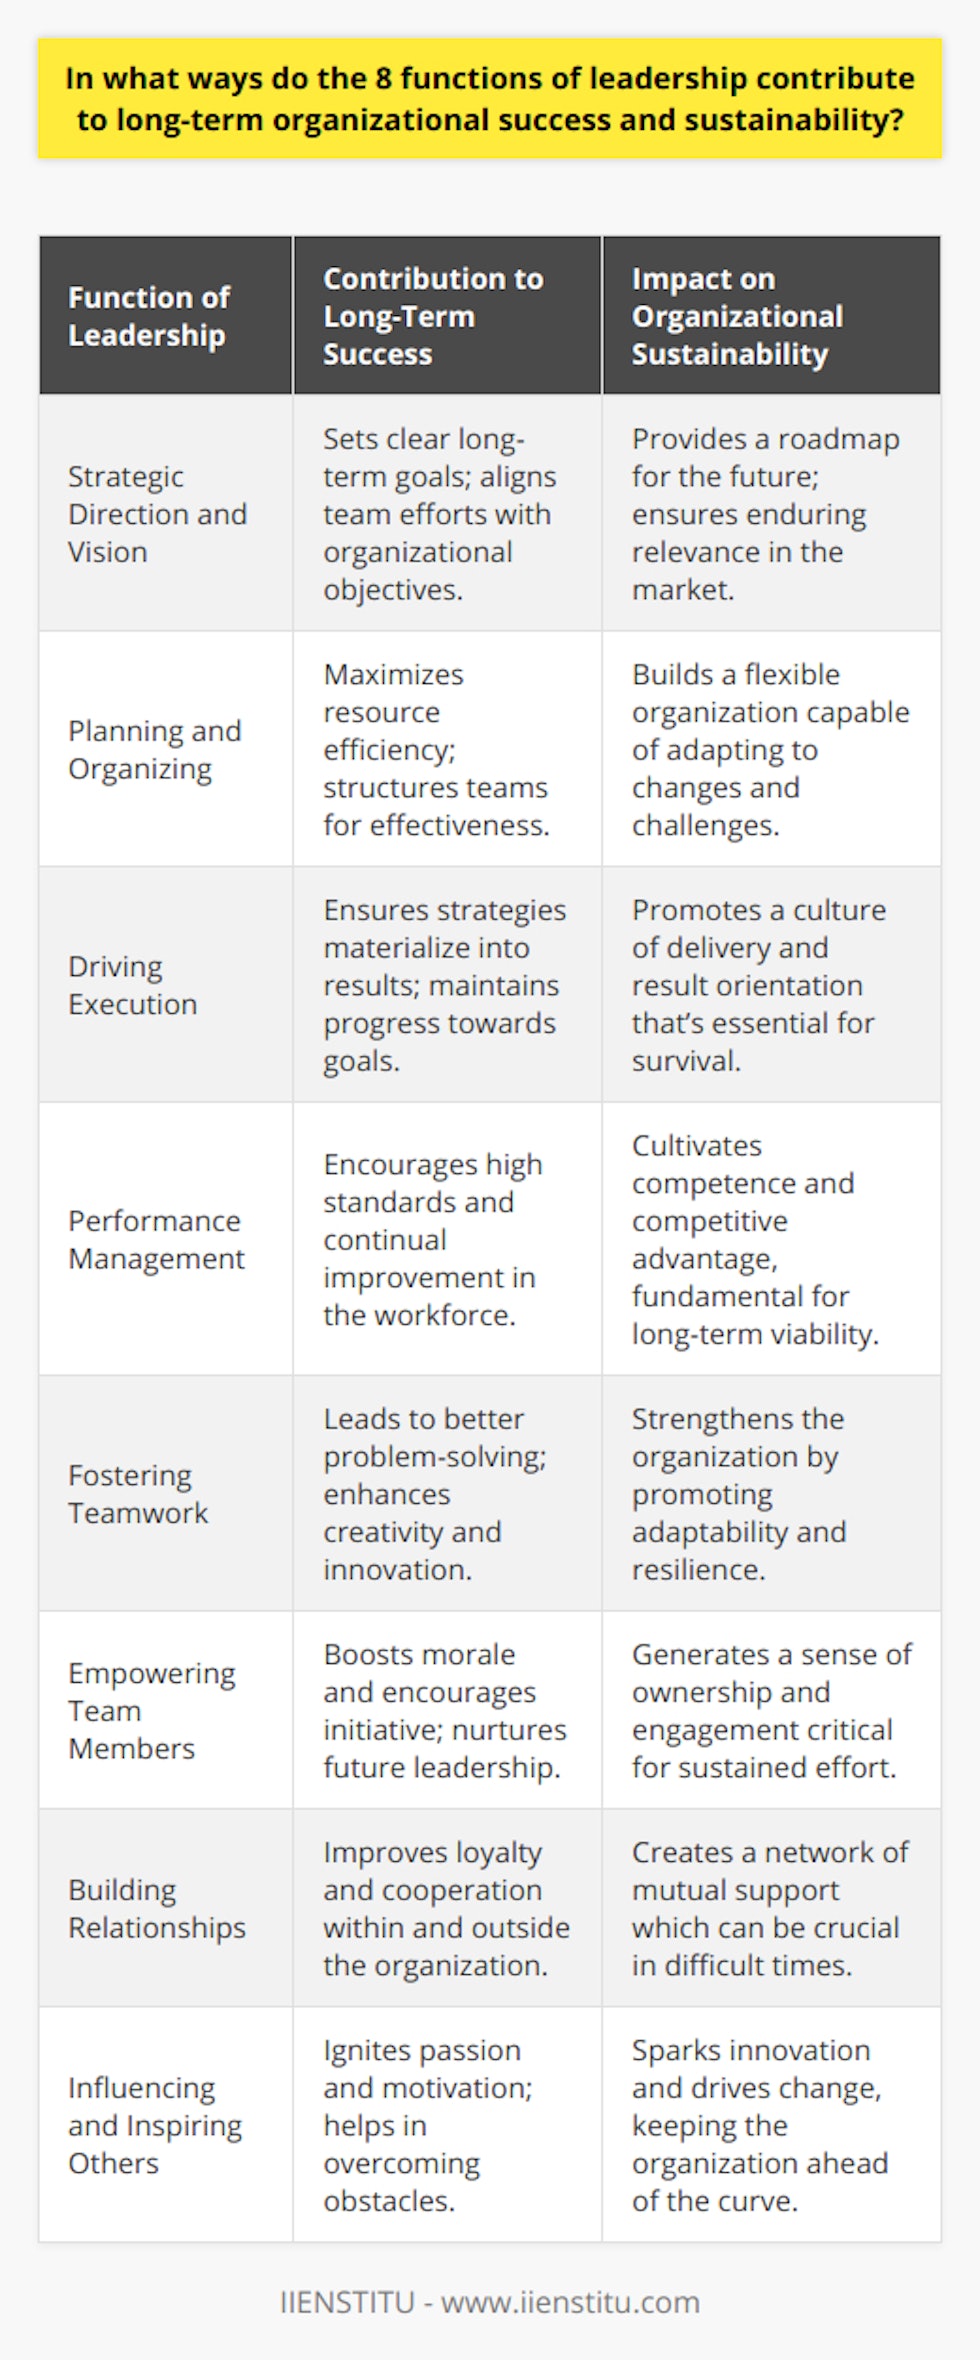 The eight functions of leadership form the backbone of effective organizational management and play a pivotal role in driving long-term success and sustainability. By understanding and applying these functions, leaders can create a robust foundation for their organizations to thrive in an ever-changing business environment.1. **Strategic Direction and Vision**: Leaders set the compass for the future, charting out a path that aligns with core values and the underlying mission of the organization. A clear vision rallies employees around common objectives and serves as a guiding star for decision-making. Strategic direction provides purpose and meaning to daily tasks, turning routine work into part of a bigger picture that contributes to long-term achievements.2. **Planning and Organizing**: This function involves structuring the organization, its departments, and teams to optimize efficiency and effectiveness. It includes meticulous resource planning, ensuring that the right people, processes, and technologies are in place to execute the business strategy. Sound planning minimizes waste, increases productivity, and configures the organization to respond quickly to opportunities and threats.3. **Driving Execution**: It's not enough to plan; leaders must also ensure that strategies are implemented with precision and passion. Execution involves mobilizing teams, driving projects forward, and ensuring that initiatives are completed within the set timelines and budgets. Leaders who excel at execution maintain focus, momentum, and a constant push towards goal attainment.4. **Performance Management**: Leaders must foster an environment of accountability where performance is measured against clearly established goals. Offering constructive feedback, addressing performance issues, and celebrating successes are all part of this function, which ensures that team members know where they stand and how they can grow. Performance management strengthens organizational competency and drives continuous development.5. **Fostering Teamwork**: Collaboration is essential in a highly connected and interdependent workplace. Encouraging teamwork entails creating a culture where diverse ideas are valued, communication is open, and conflicts are resolved constructively. Good teamwork fuels innovation and allows for complex problem-solving, giving the organization a competitive edge.6. **Empowering Team Members**: Leaders who delegate authority and trust their colleagues foster empowerment. This empowerment enhances job satisfaction, inspires employees to take initiative, and nurtures future leaders within the organization. Moreover, it promotes a culture of ownership where individuals are invested in the organization's outcomes.7. **Building Relationships**: Strong relationships are built on mutual respect, trust, and understanding. This leadership function impacts not only the internal dynamics of an organization but also its external partnerships and public image. Leaders adept at relationship-building drive loyalty and engagement among employees, customers, and other stakeholders.8. **Influencing and Inspiring Others**: A leader’s ability to motivate and inspire acts as the spark that ignites team spirit and drives people to exceed their own expectations. Inspirational leadership can lift an organization during tough times and can stimulate innovation and change, ensuring the organization is always progressing and not stagnating.The synergy of these eight functions leads to a resilient and dynamic organization, defined by purposeful action, adaptability, and a deep-seated drive for excellence. When a leader understands and harnesses the potential of these functions, they set the stage for an organization that not only survives over the long haul but thrives and sets an example for others to follow.